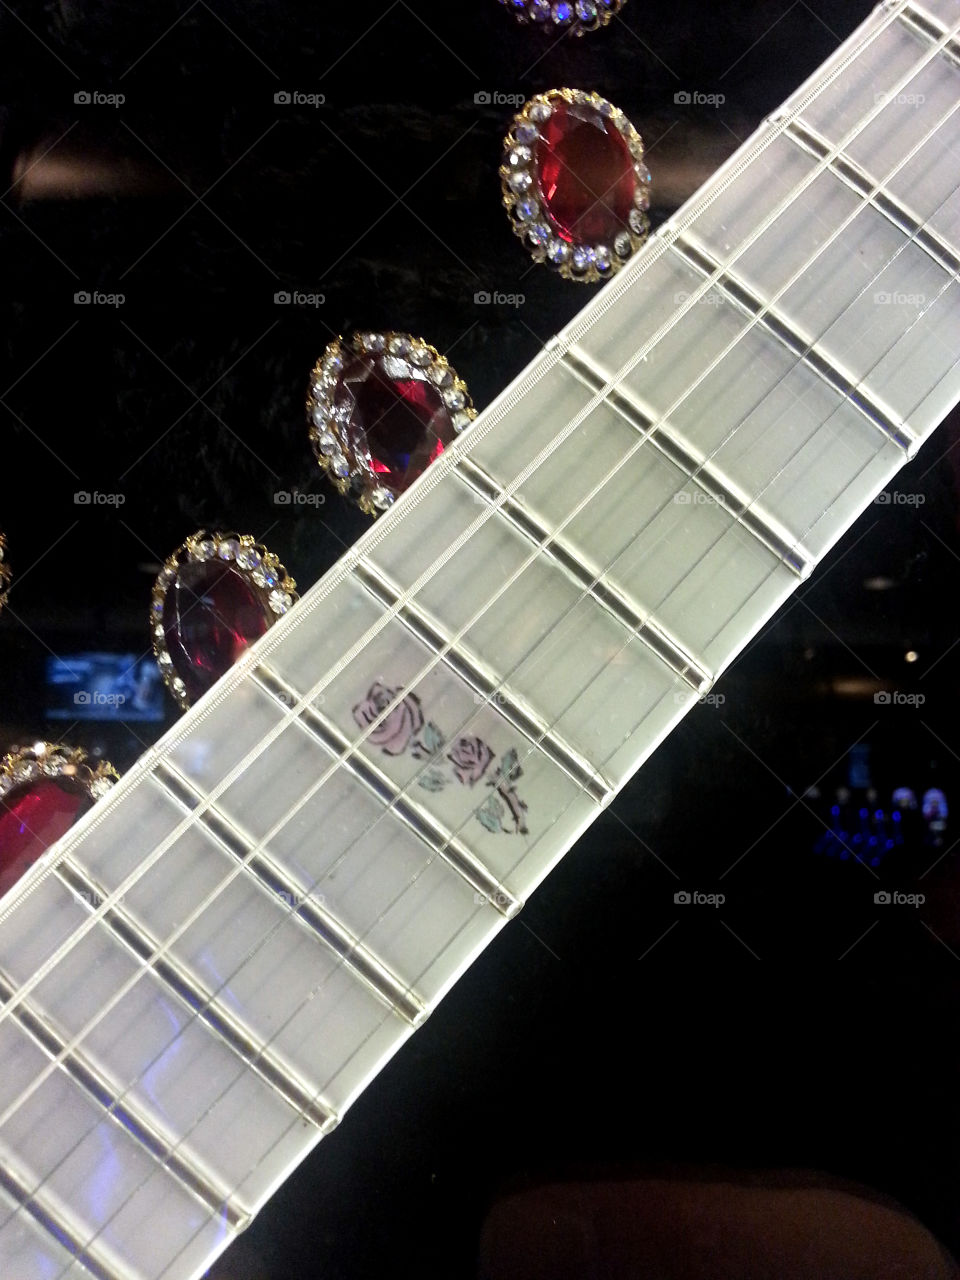 Close Up of Prince's Guitar (with jacket buttons behind it). Hard Rock Casino, Las Vegas,Nevada